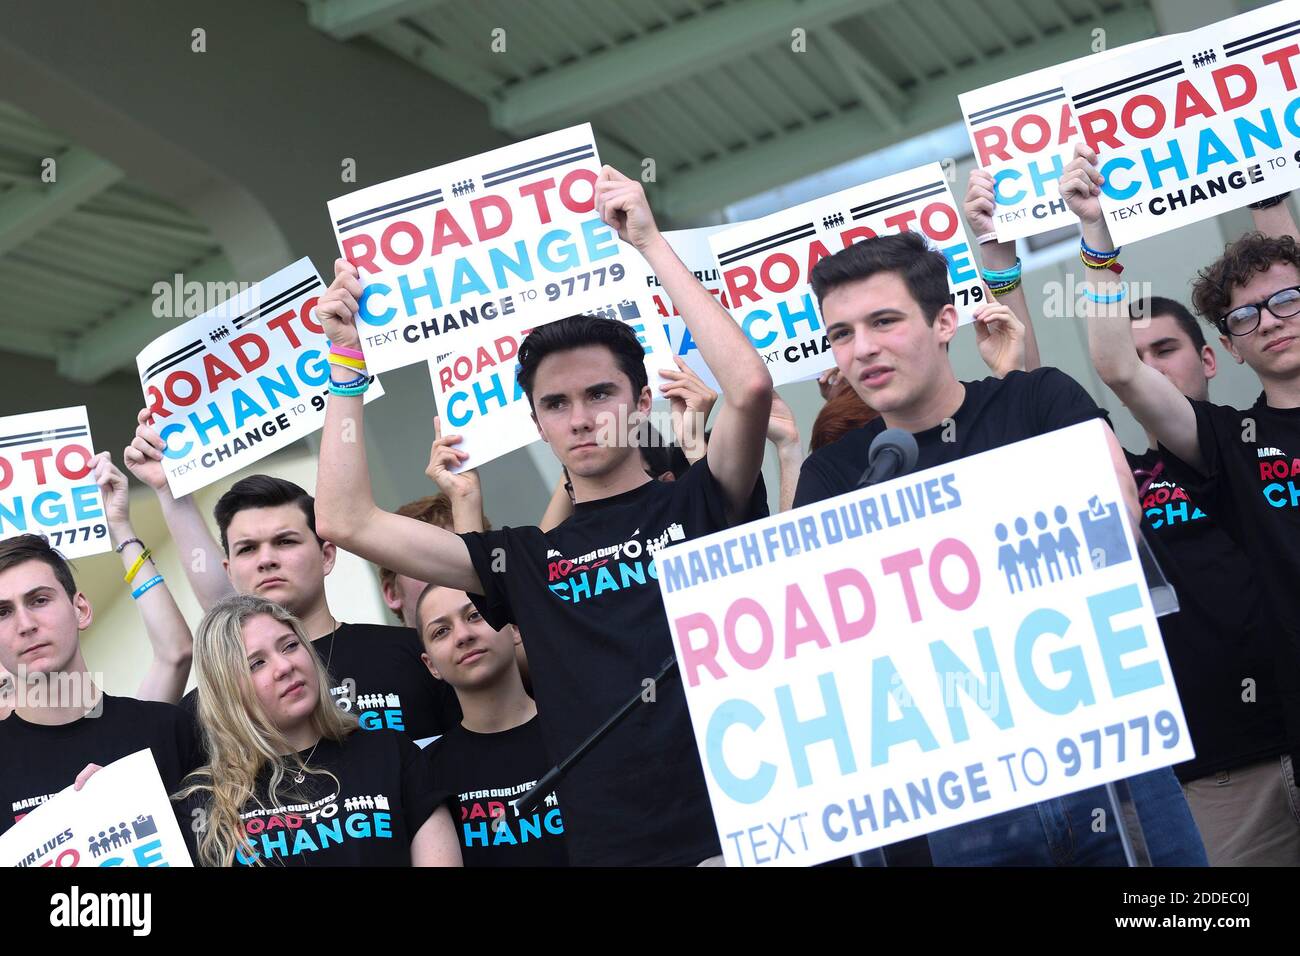 NO FILM, NO VIDEO, NO TV, NO DOCUMENTARY - Parkland shooting survivors Emma Gonzalez, David Hogg and Cameron Kaskey hold a press conference for the March for Our Lives movement on Monday, June 4, 2018 at the Pines Trails Park in Parkland, Fla. They announced a 20-state tour dubbed 'The March For Our Lives: Road to Change,' where they plan to meet with young voters and campaign to end gun violence. Photo by Ellis Rua/Miami Herald/TNS/ABACAPRESS.COM Stock Photo